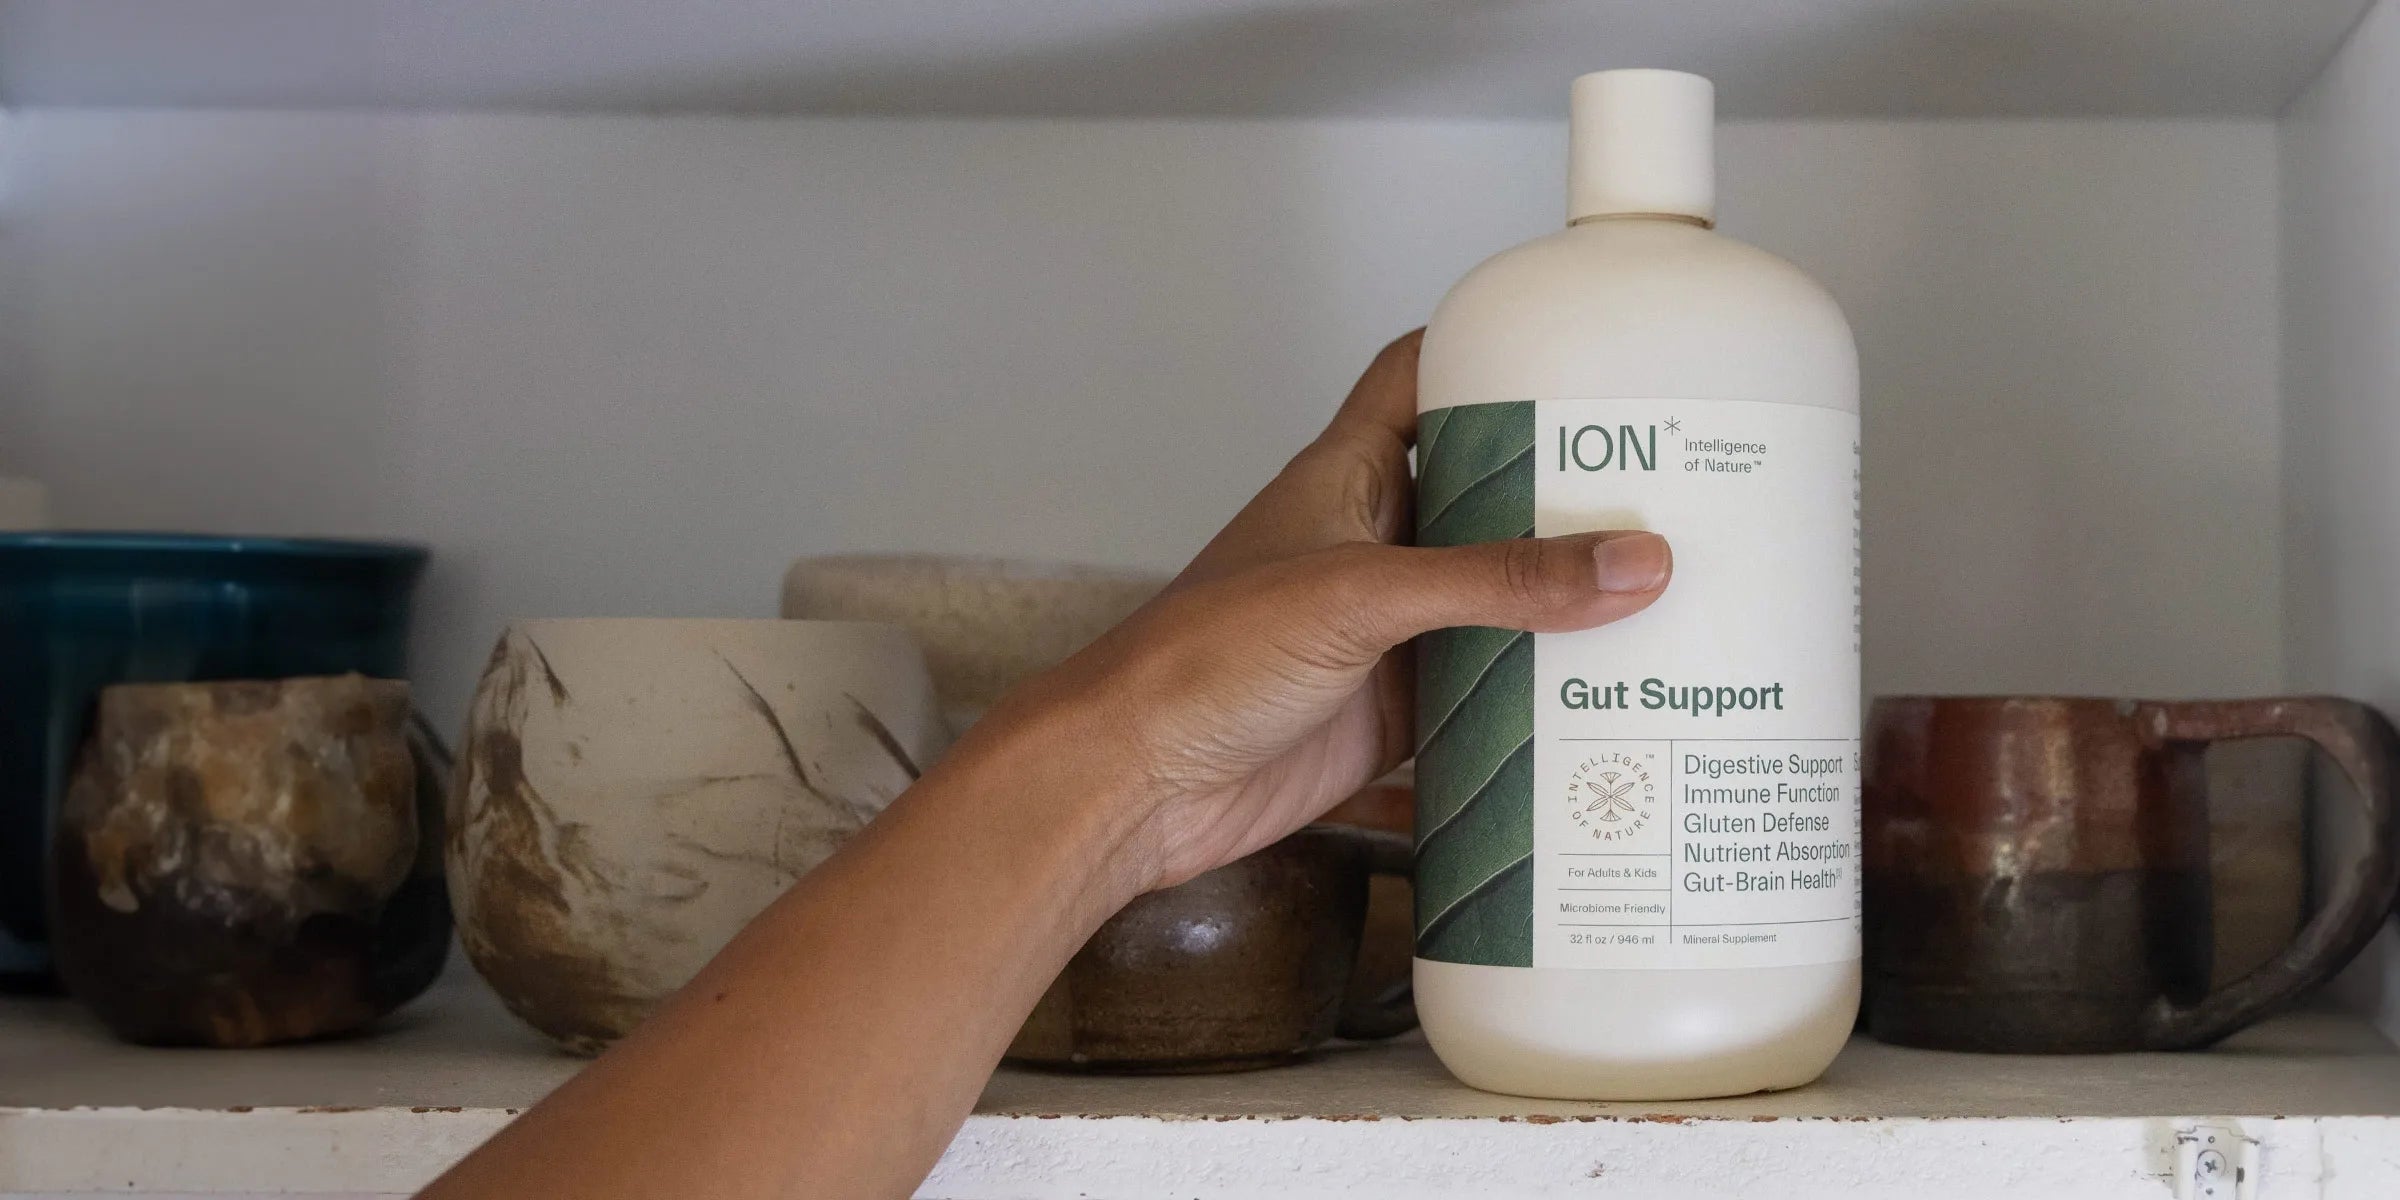 ION Gut Support products